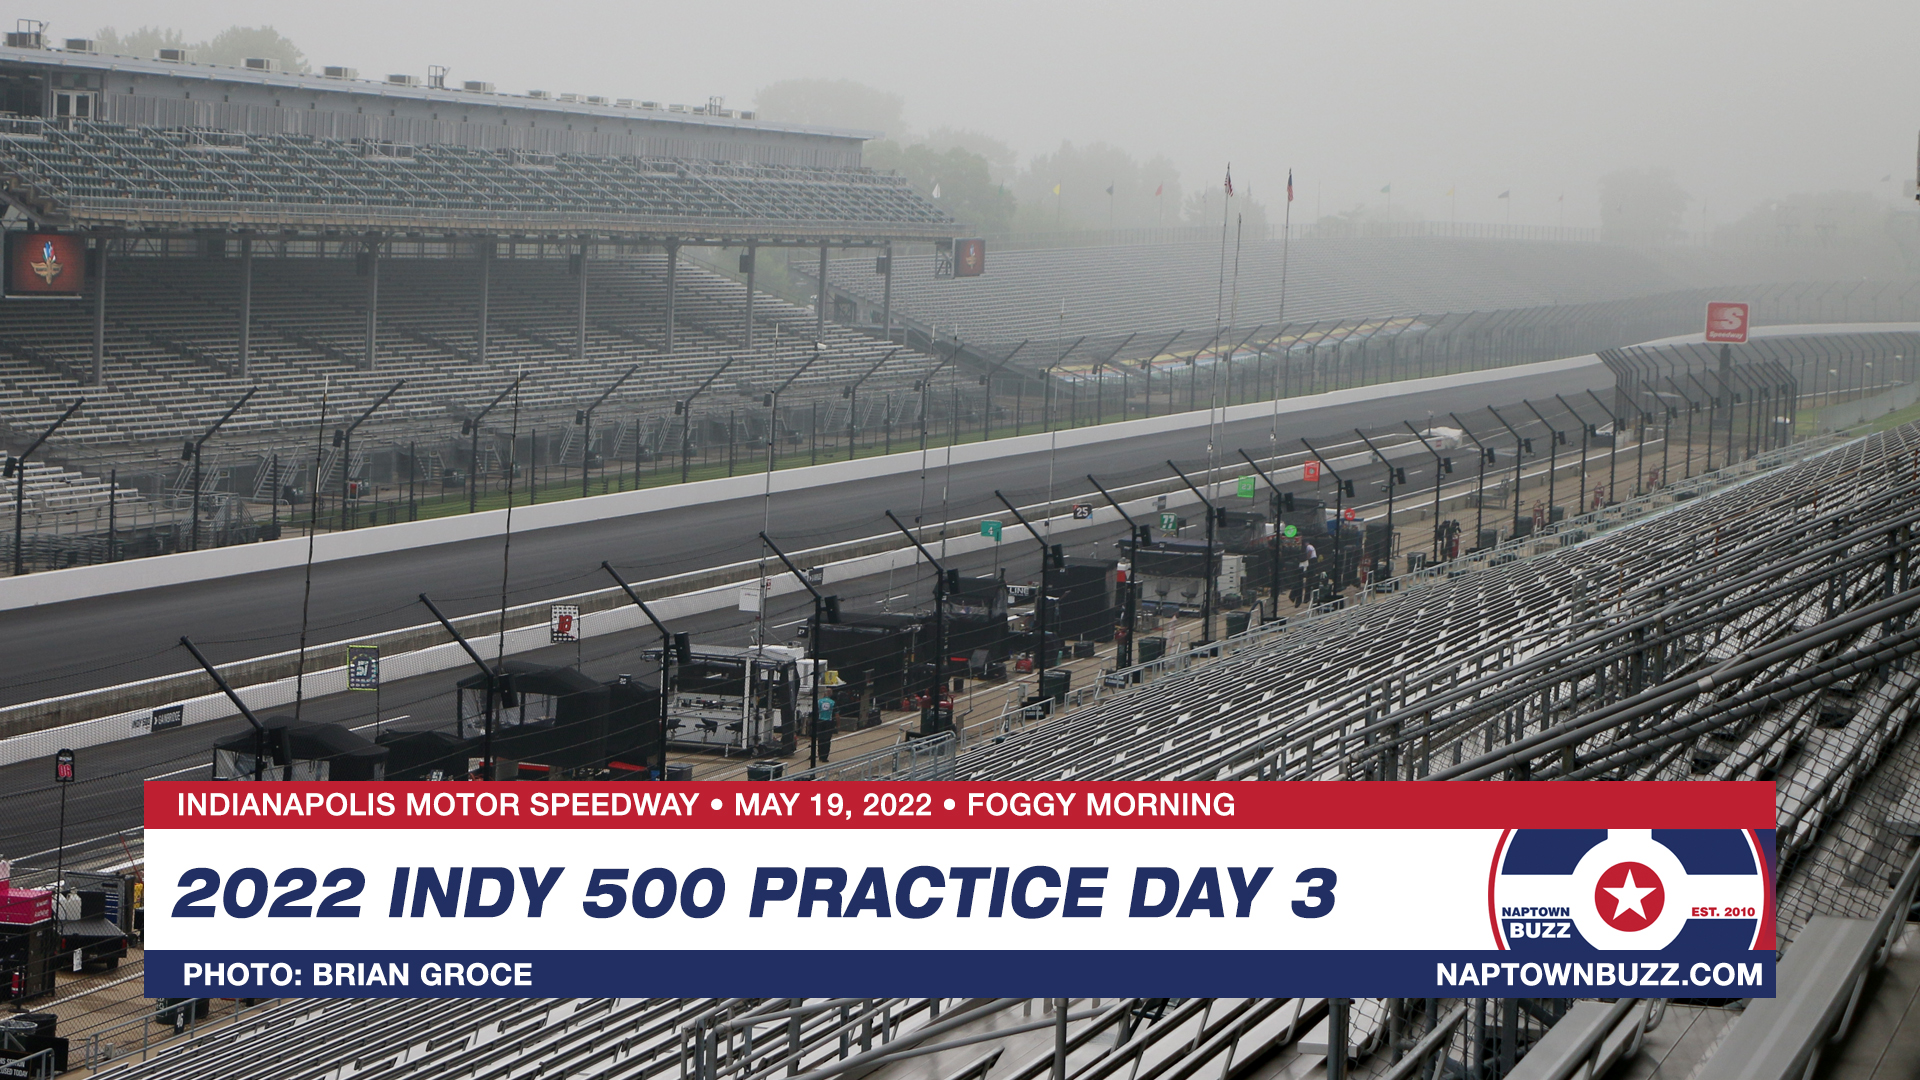 Foggy Morning on Indy 500 Practice Day 3 at Indianapolis Motor Speedway on May 19, 2022